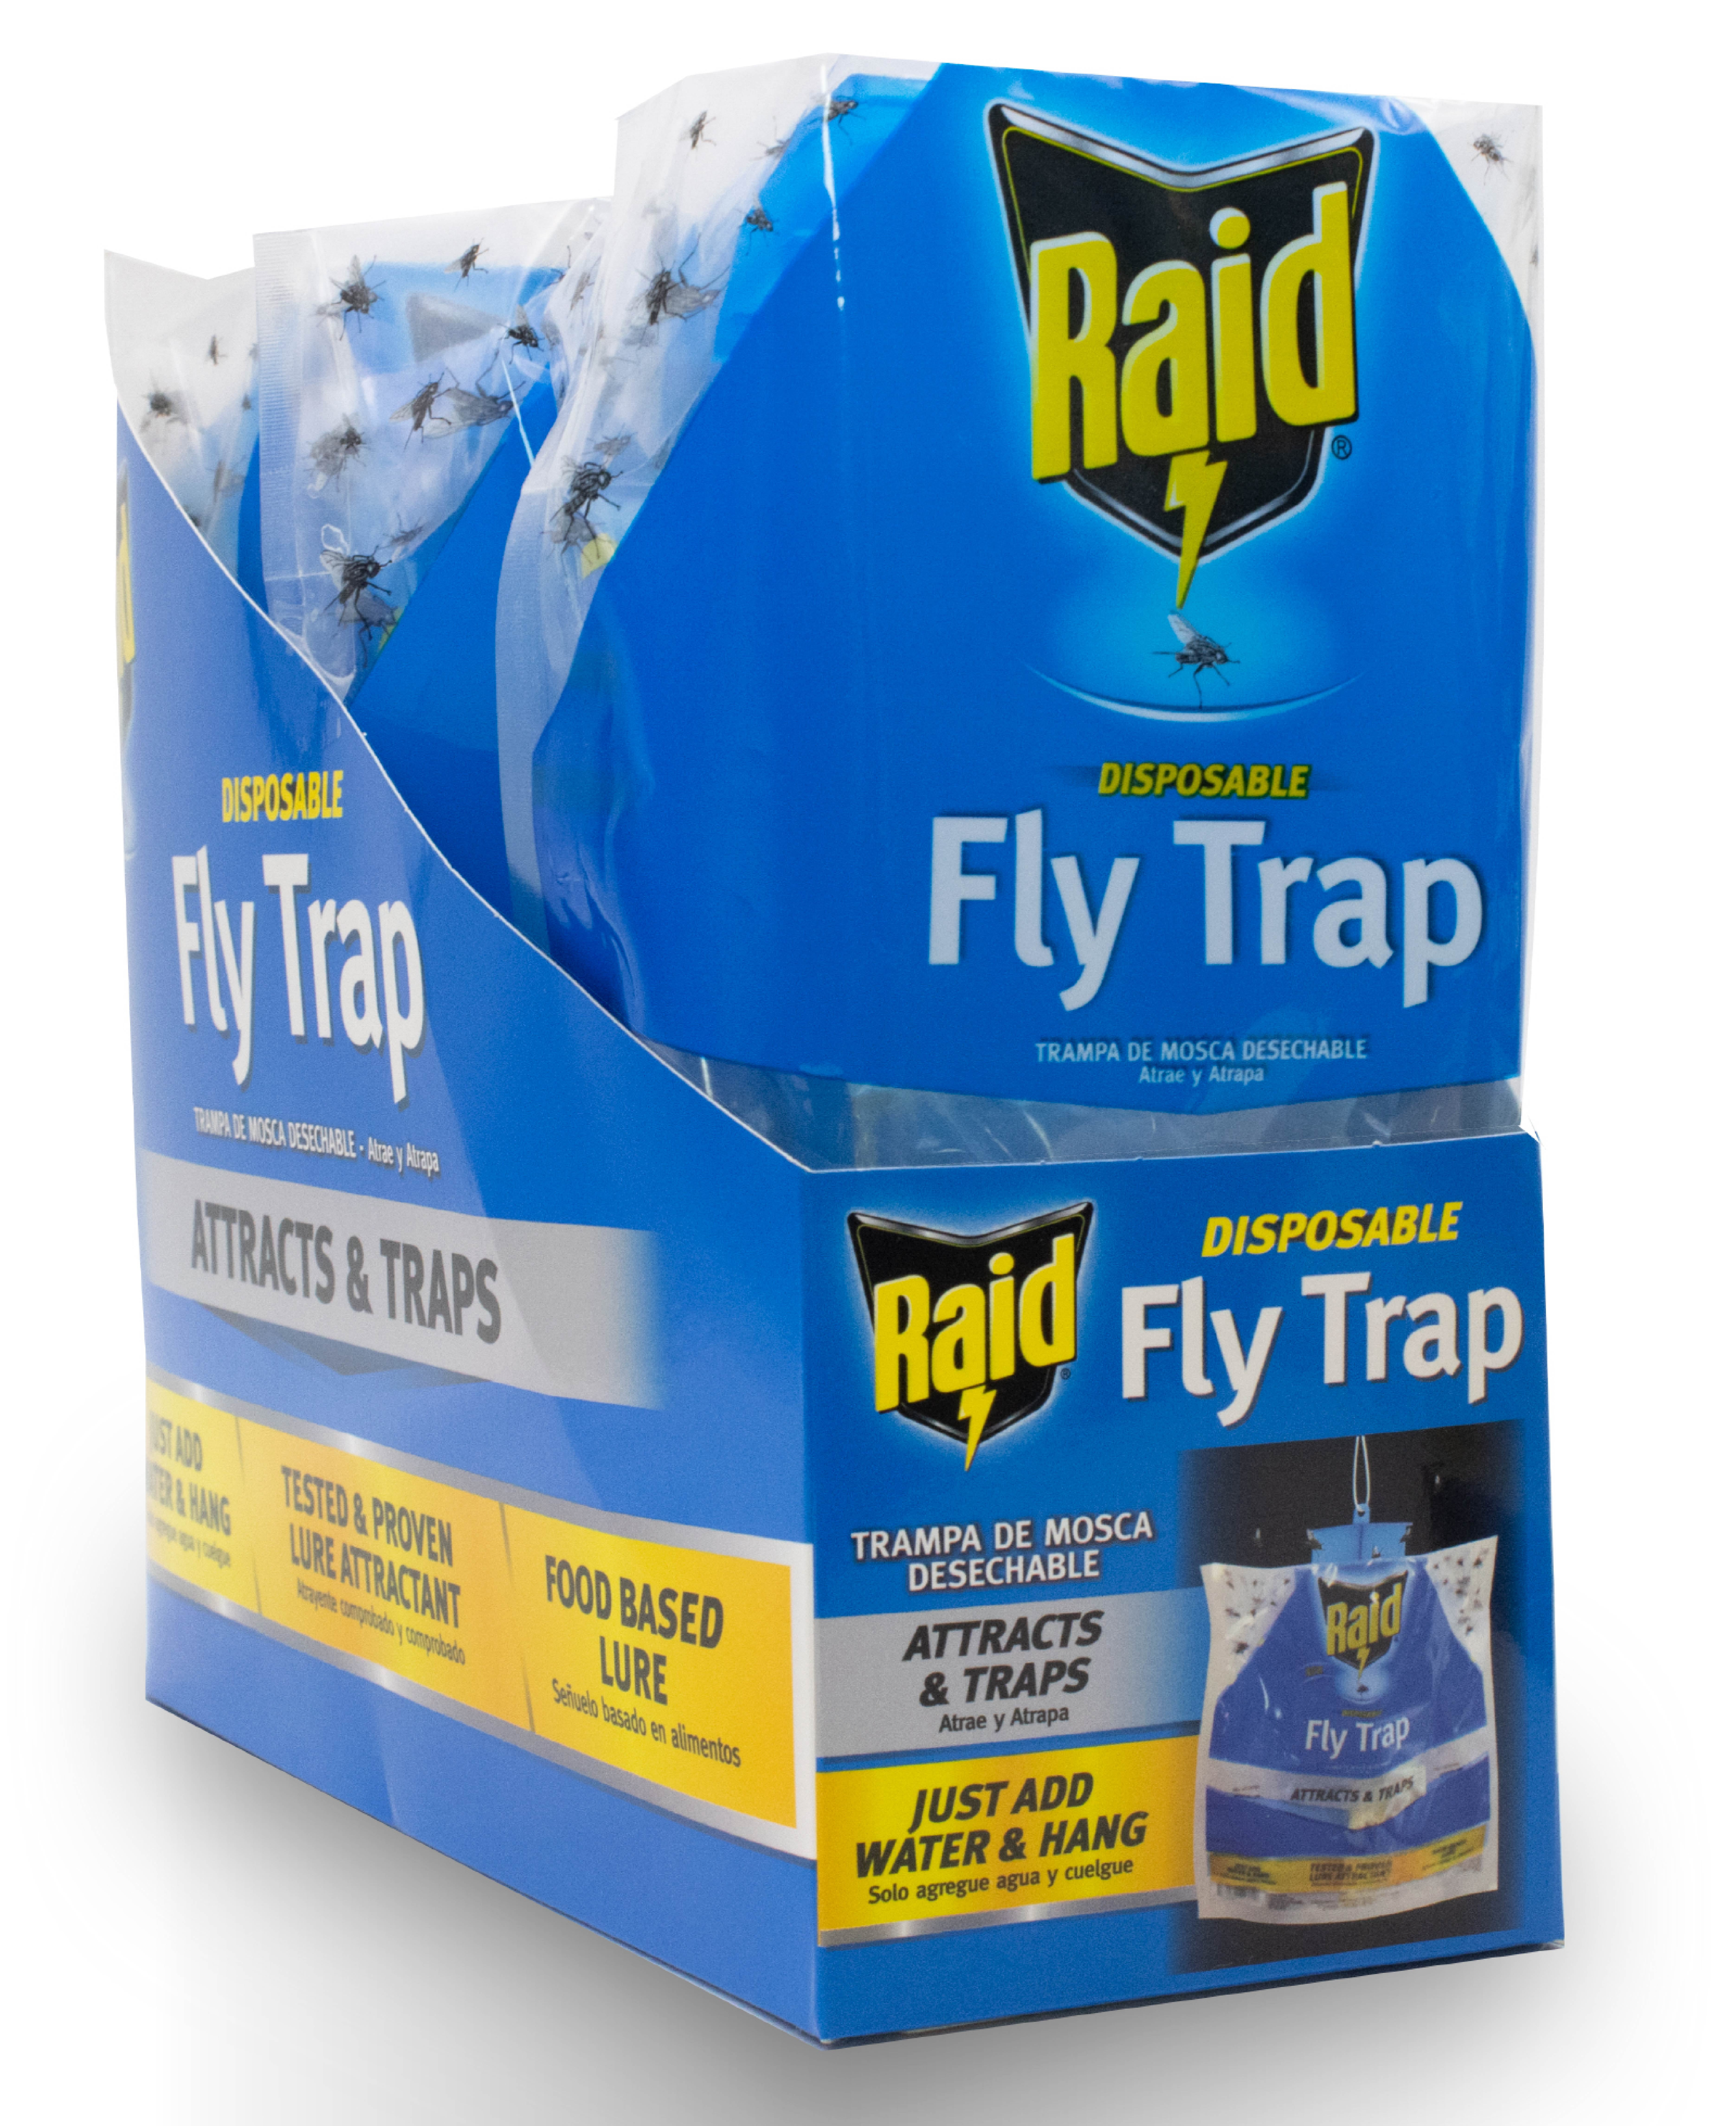 Intruder The Better Flytrap Disposable Indoor Fly Trap (4-Pack) 21080, 1 -  Ralphs